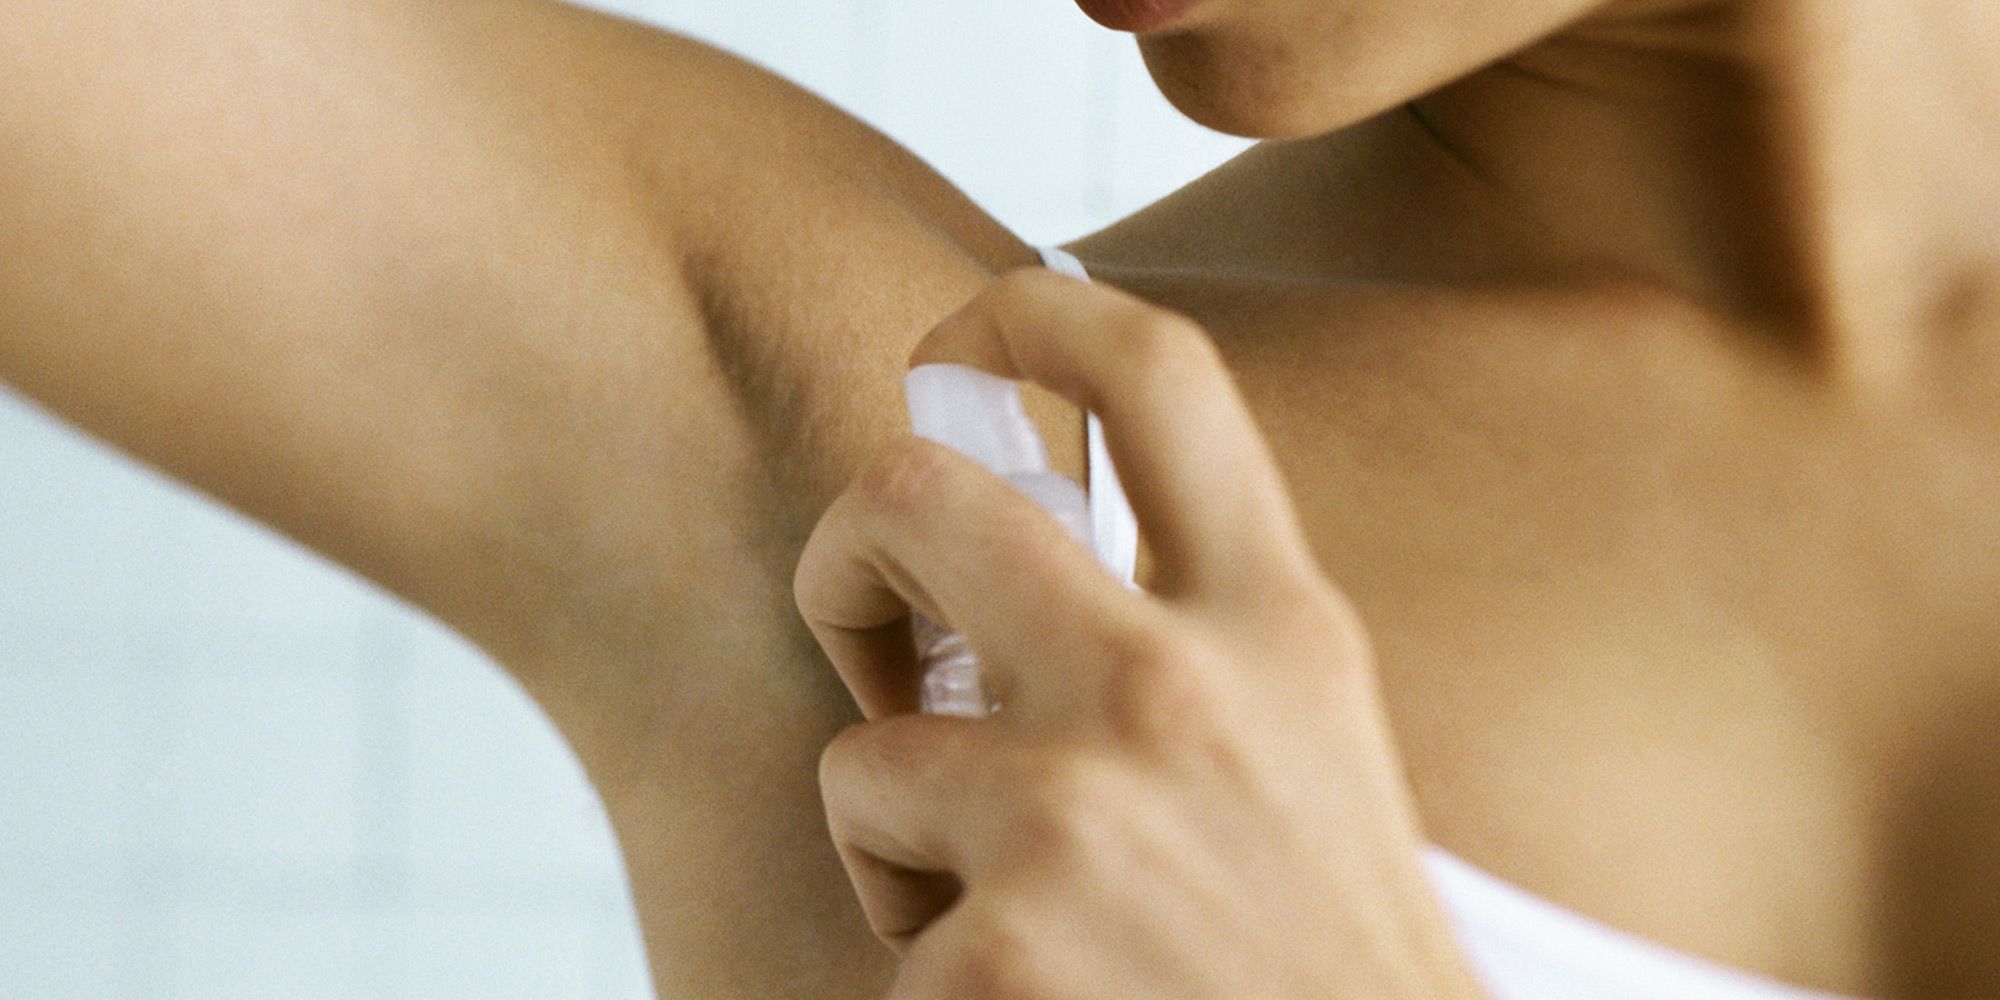 Why Should You Make The Switch To A Natural Deodorant?